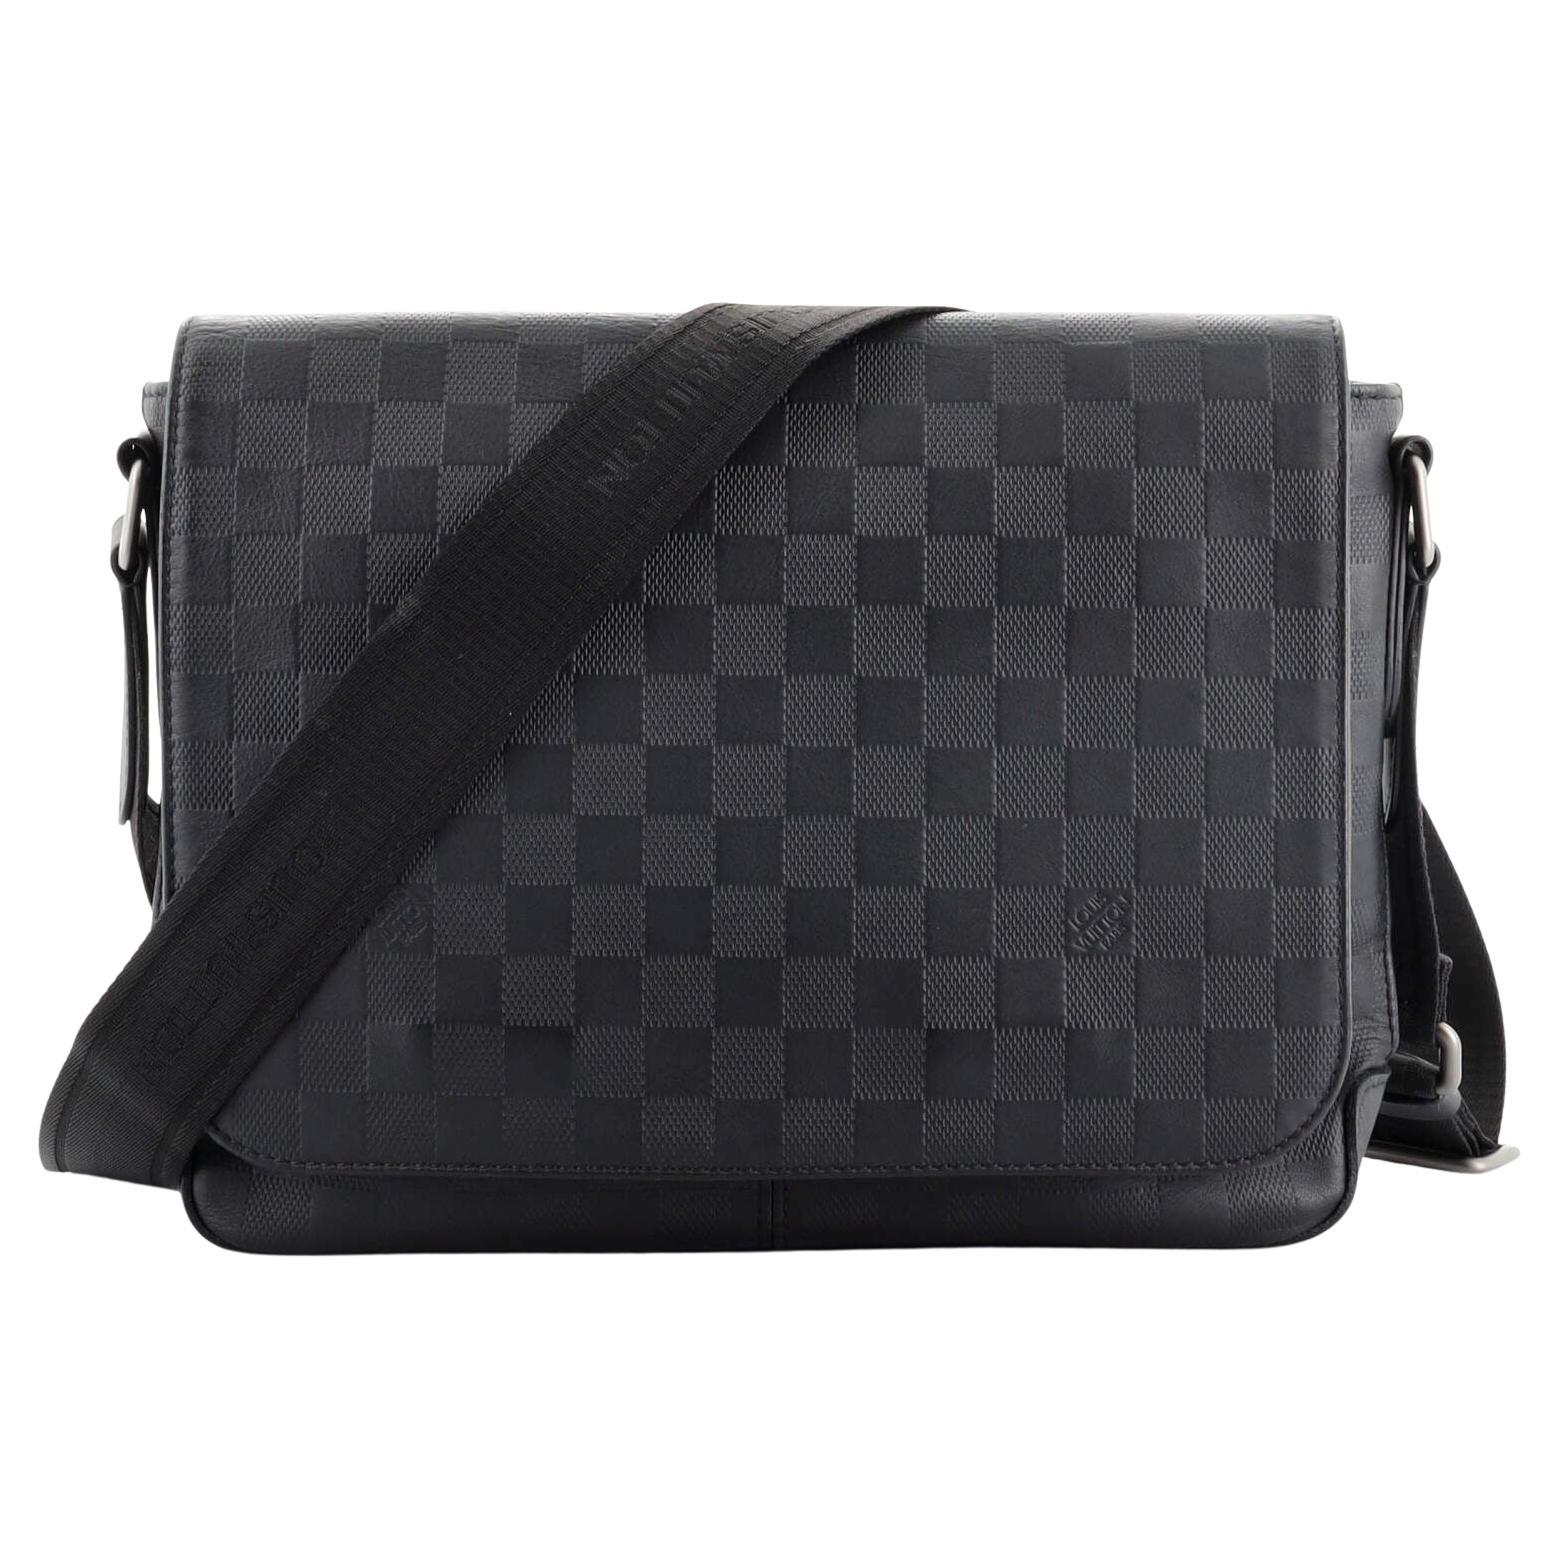 Sold LV District PM Damier Infini Leather 2019